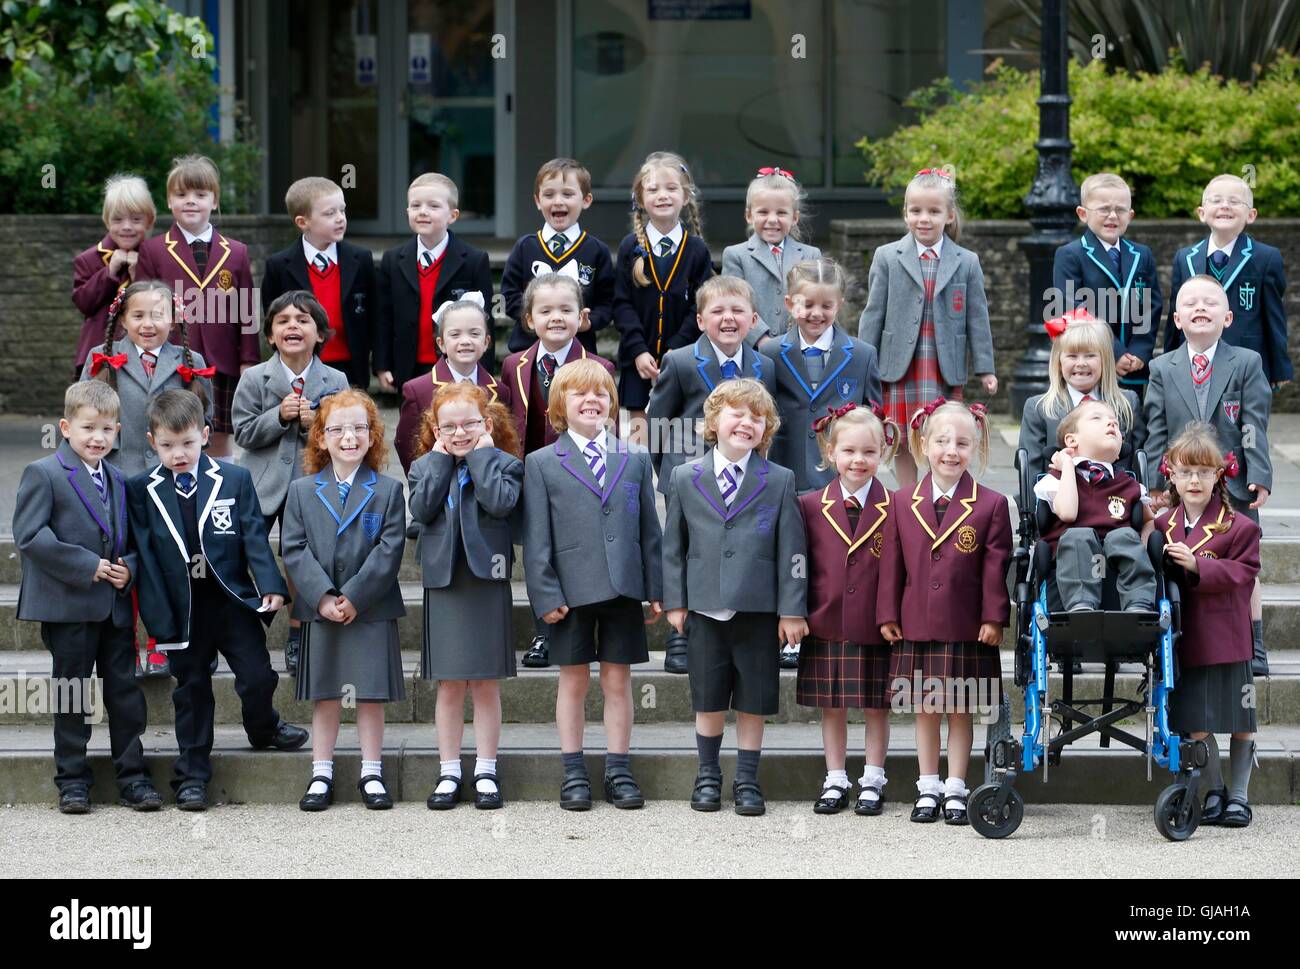 14 out of 15 sets of twins, from the Inverclyde area, pose for a photograph in Clyde Square in Greenock, ahead of their first day at school. Pictured are (back row left to right) Emma and Grace McEleny (4), Fraser and Nathan McGrath (5), Jackson and Elizabeth Reid (5), Brooke and Skye Smith (4), Andrew and Thomas Stewart (4), (middle row left to right) Charlotte and Morgan Goyal (5), Orlagh and Niamh Keen (4), Charlie and Olivia Lyne (5), Olivia and Rhogen McCurry (5), (front row left to right) Craig and Stuart Arthur (5), Caragh and Sophie Doig (5), Jude and Luca Donnachie (5), Jessica and La Stock Photo